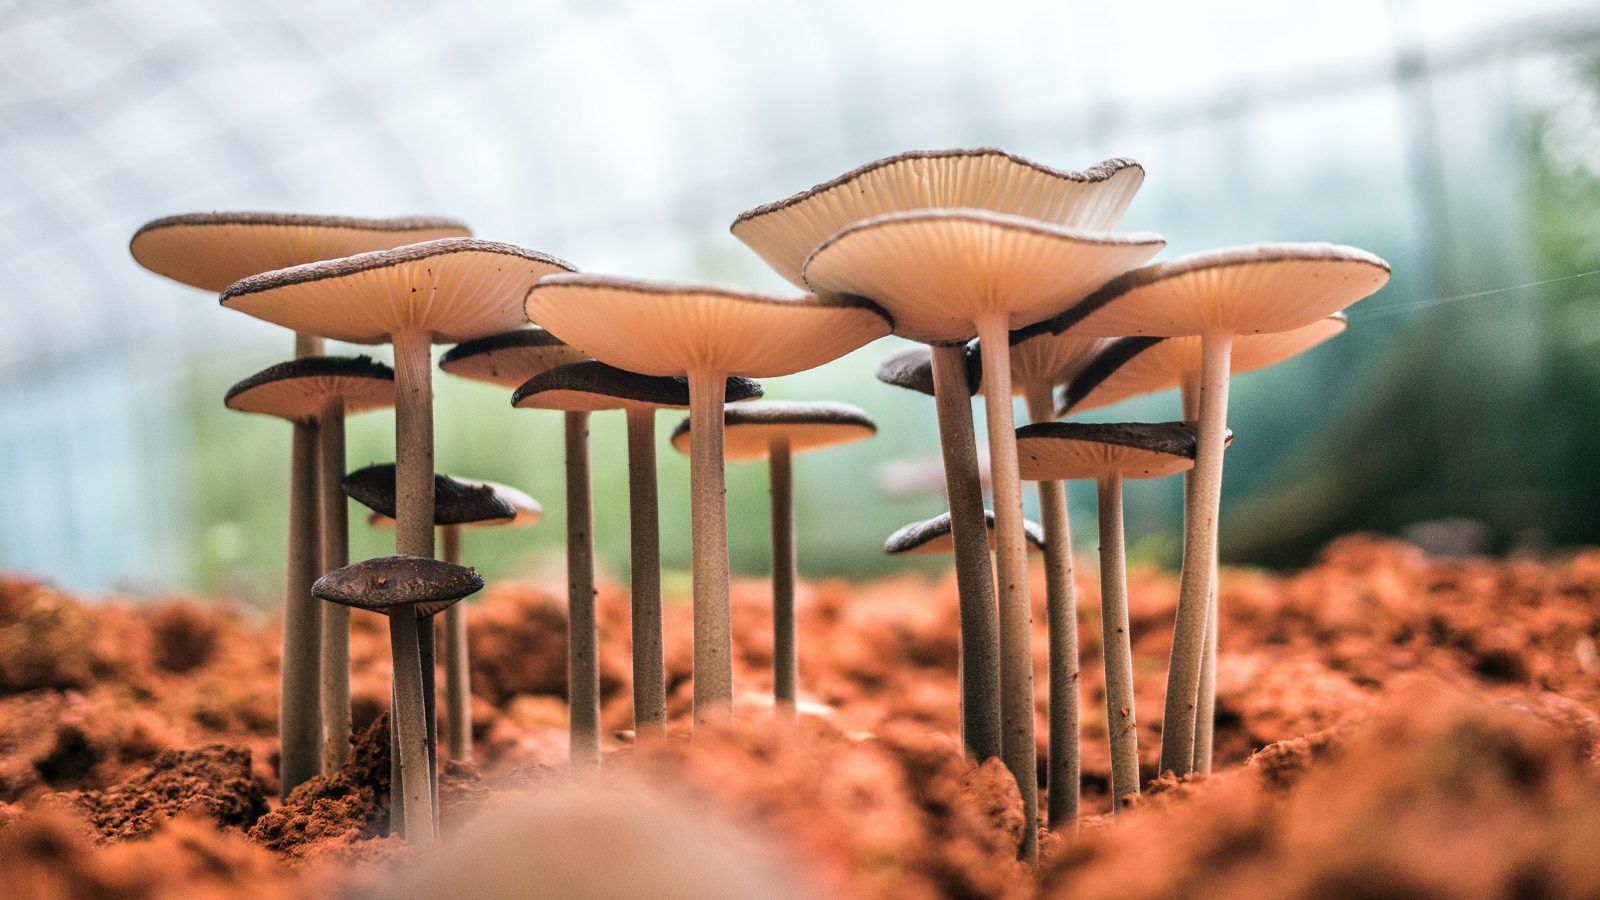 Thailand is looking to relax laws on magic mushrooms